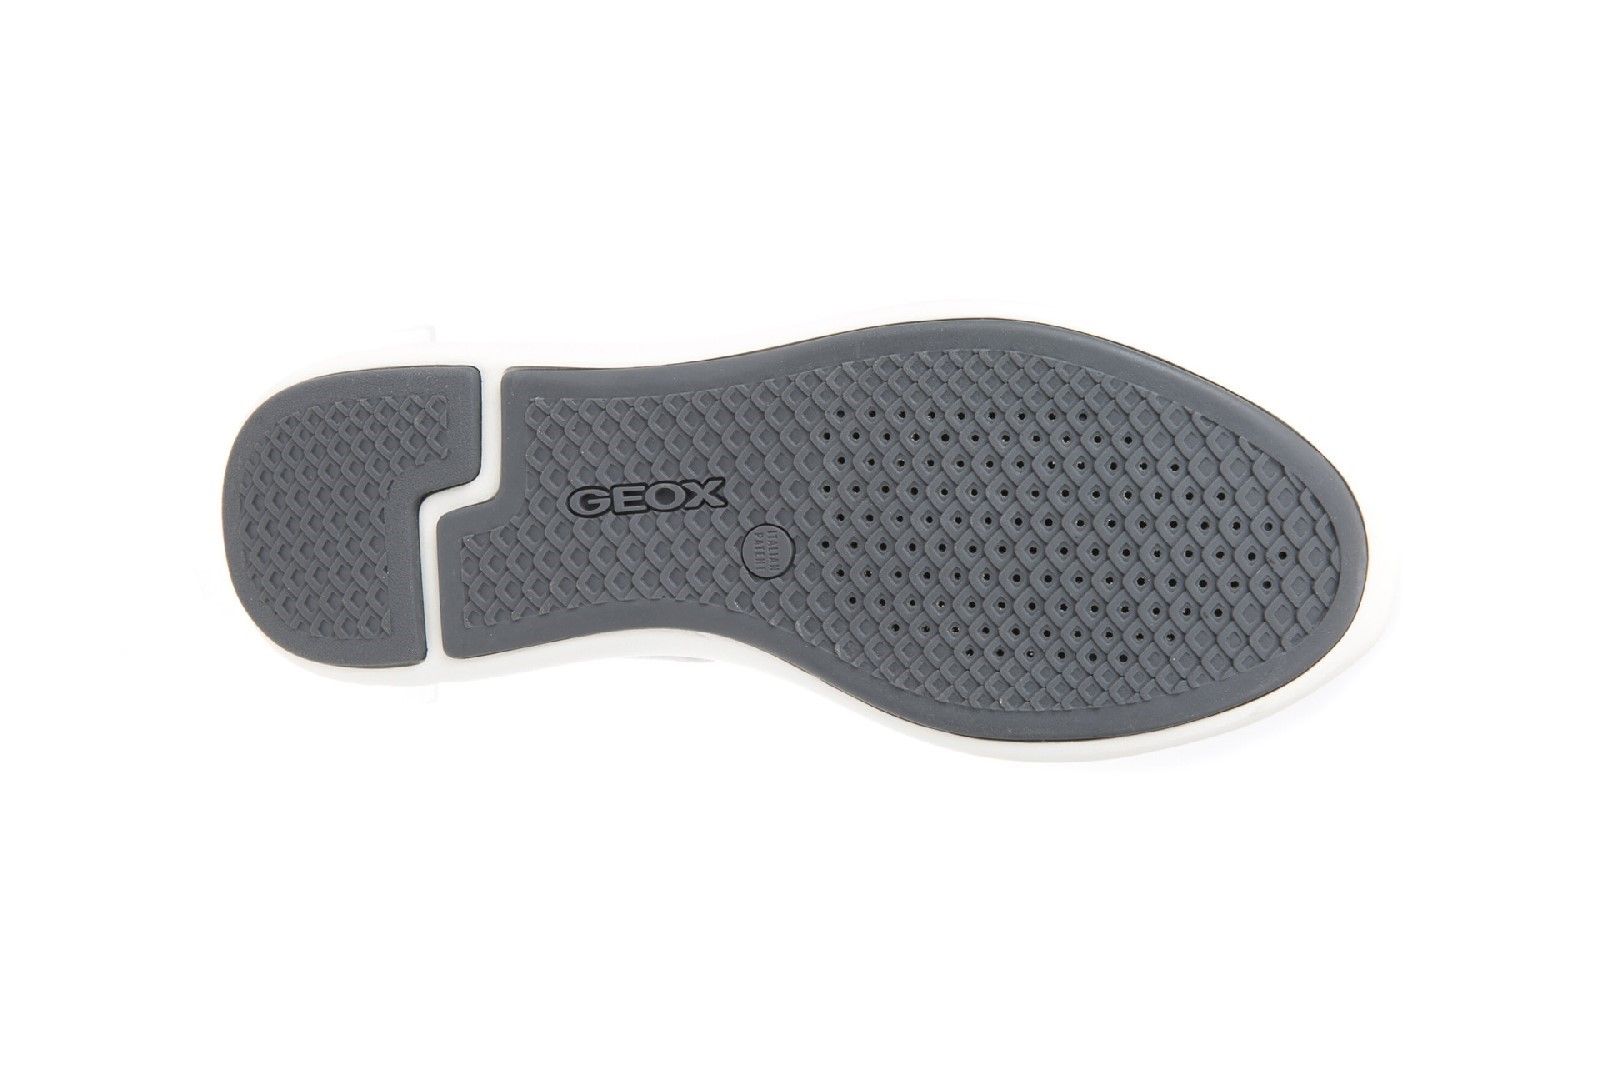 Exclusive patent. The combination of the perforated sole and resistant breathable and waterproof membrane allow for natural temperature regulation, creating the perfect microclimate inside the shoe.It keeps feet dry and comfortable for the whole day.Exclusive Patent. 
Perforated Sole. 
Breathable and waterproof membrane.